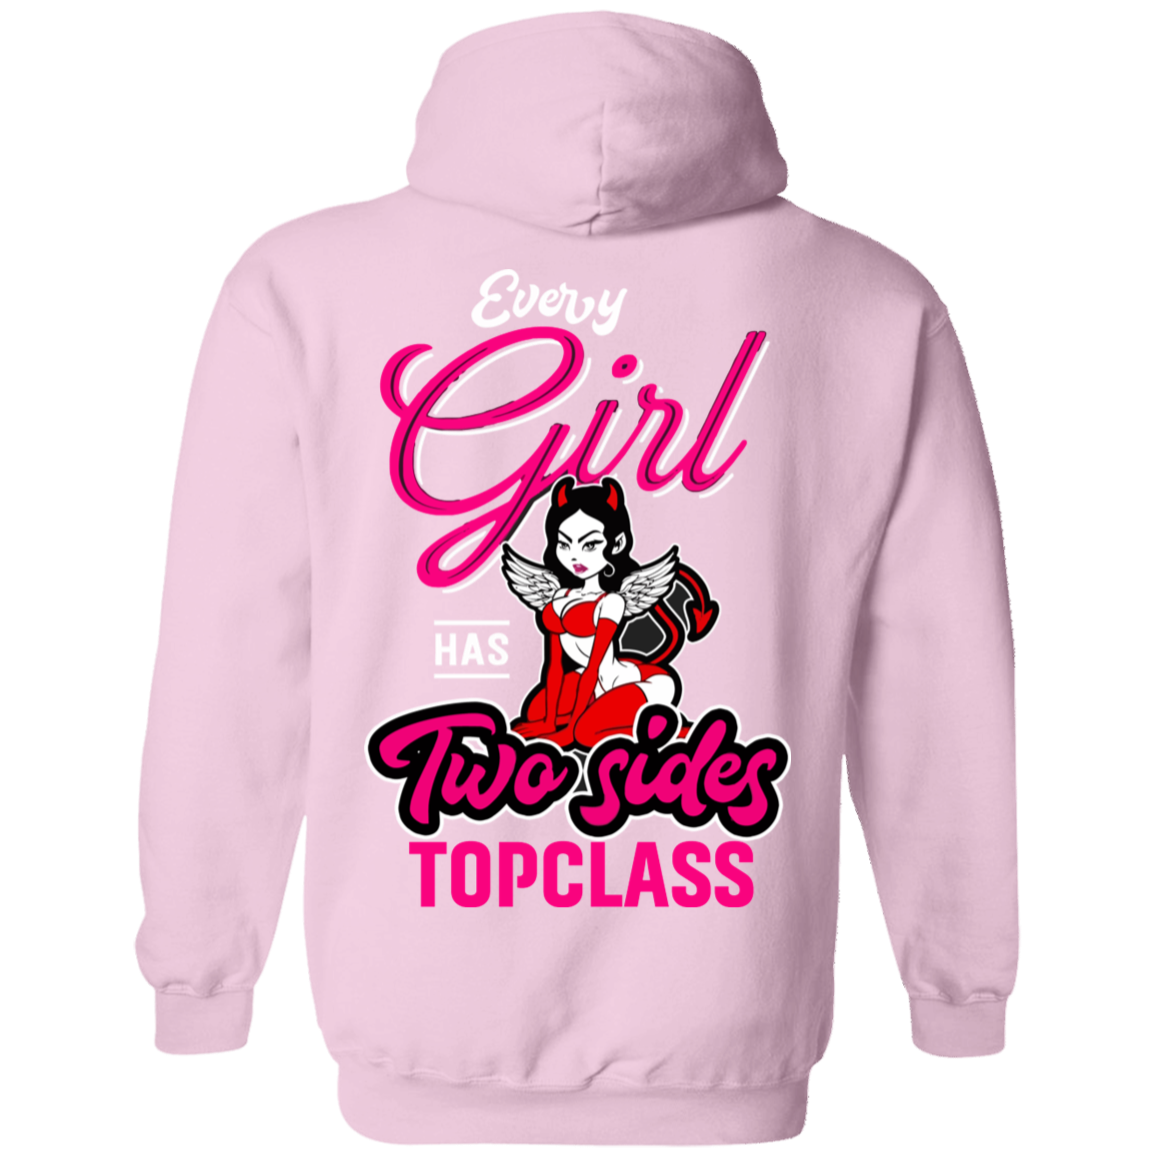 Topclass Every girl has two sides hoodie